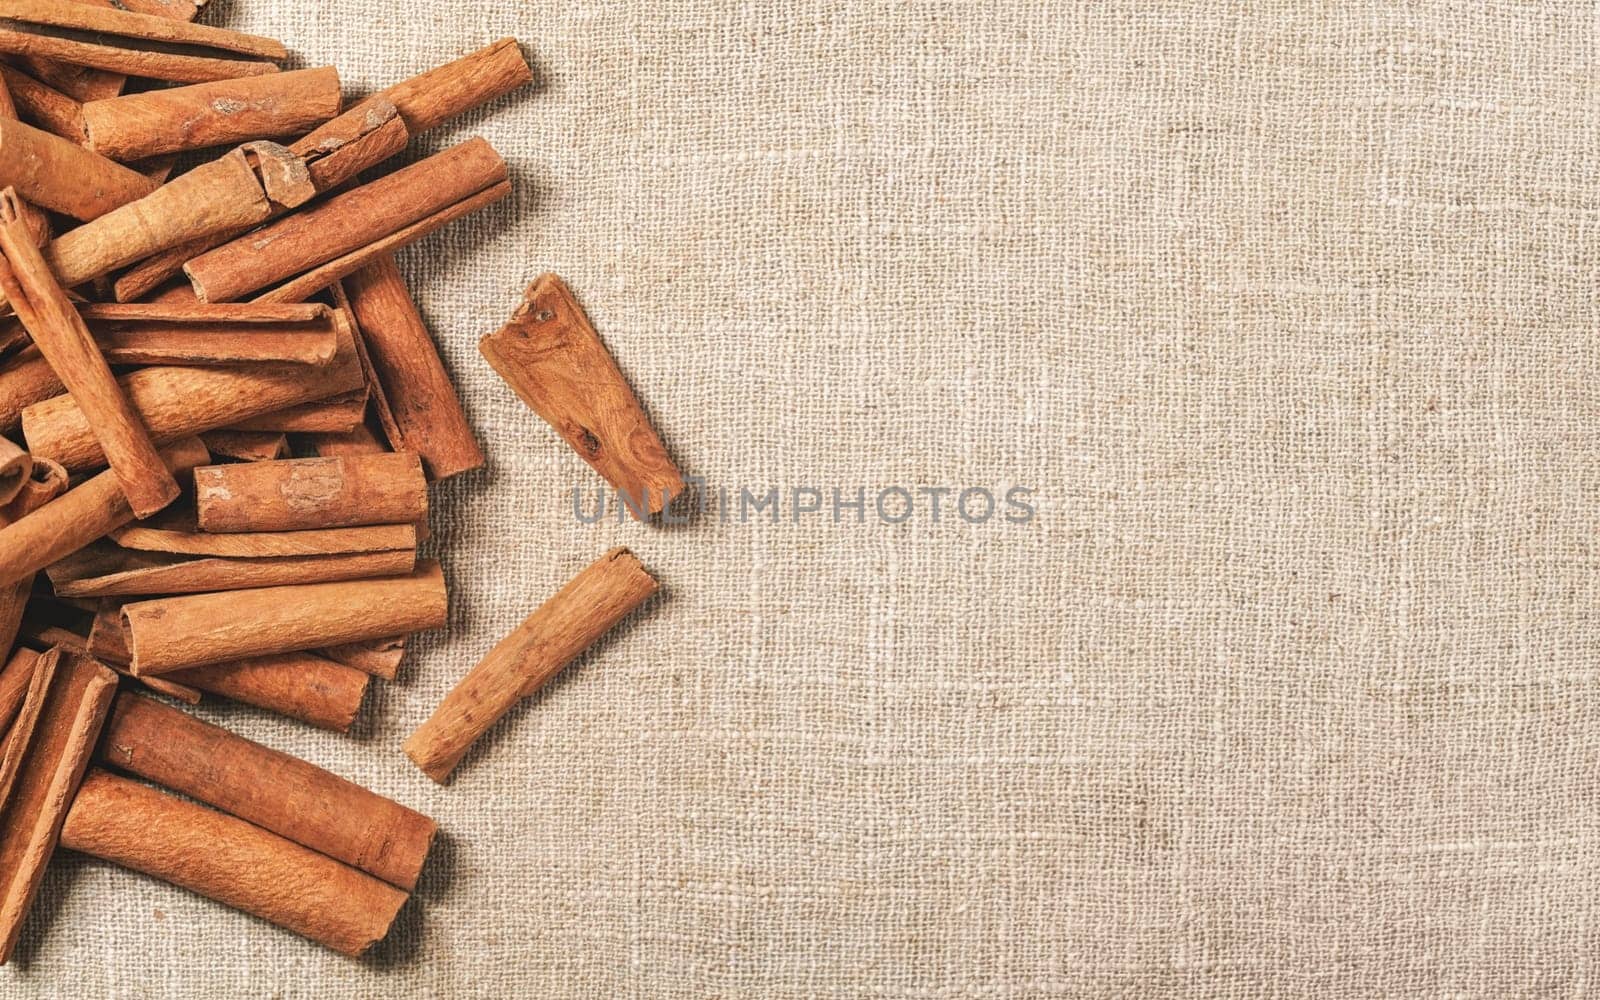 Top down view - Heap of cinnamon bark sticks on linen tablecloth, space for text on right side by Ivanko